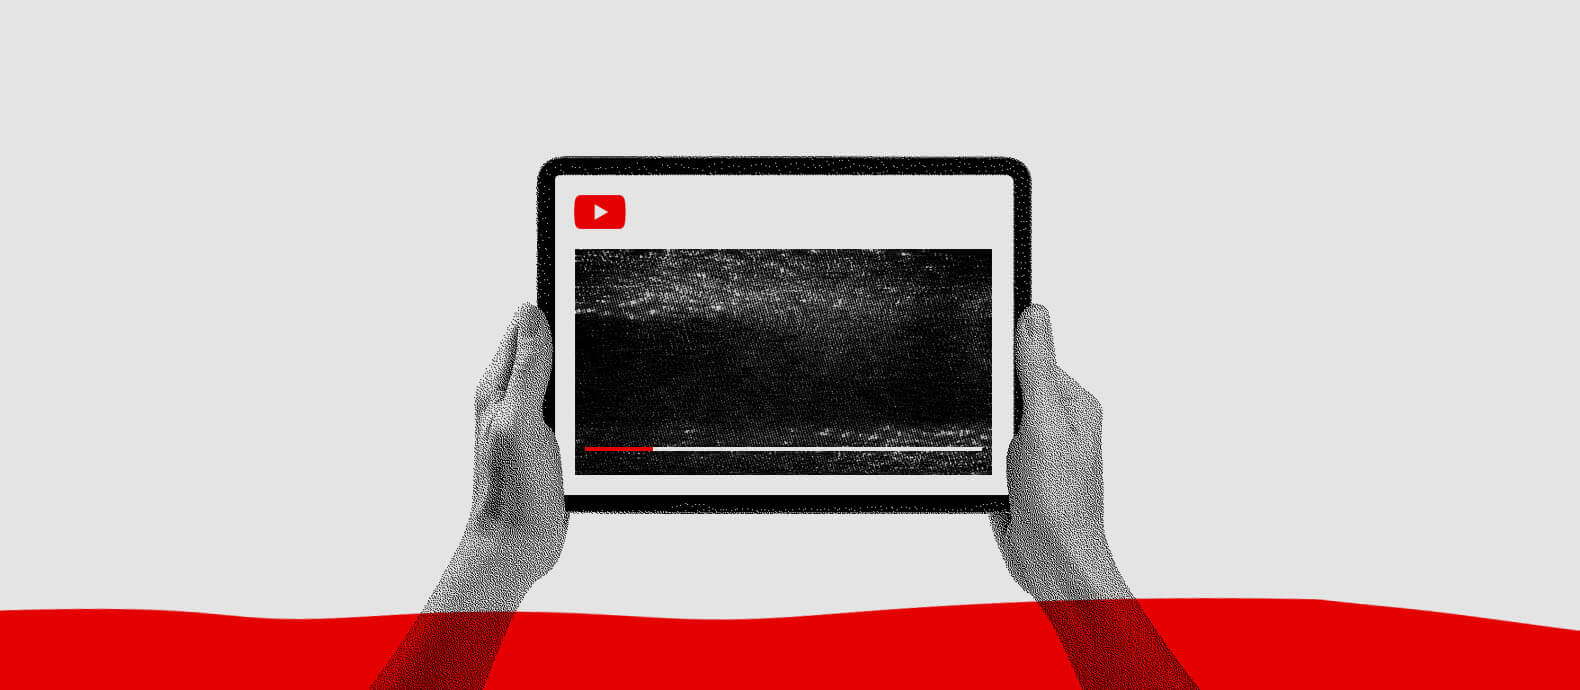 How to report copyright infringement on YouTube